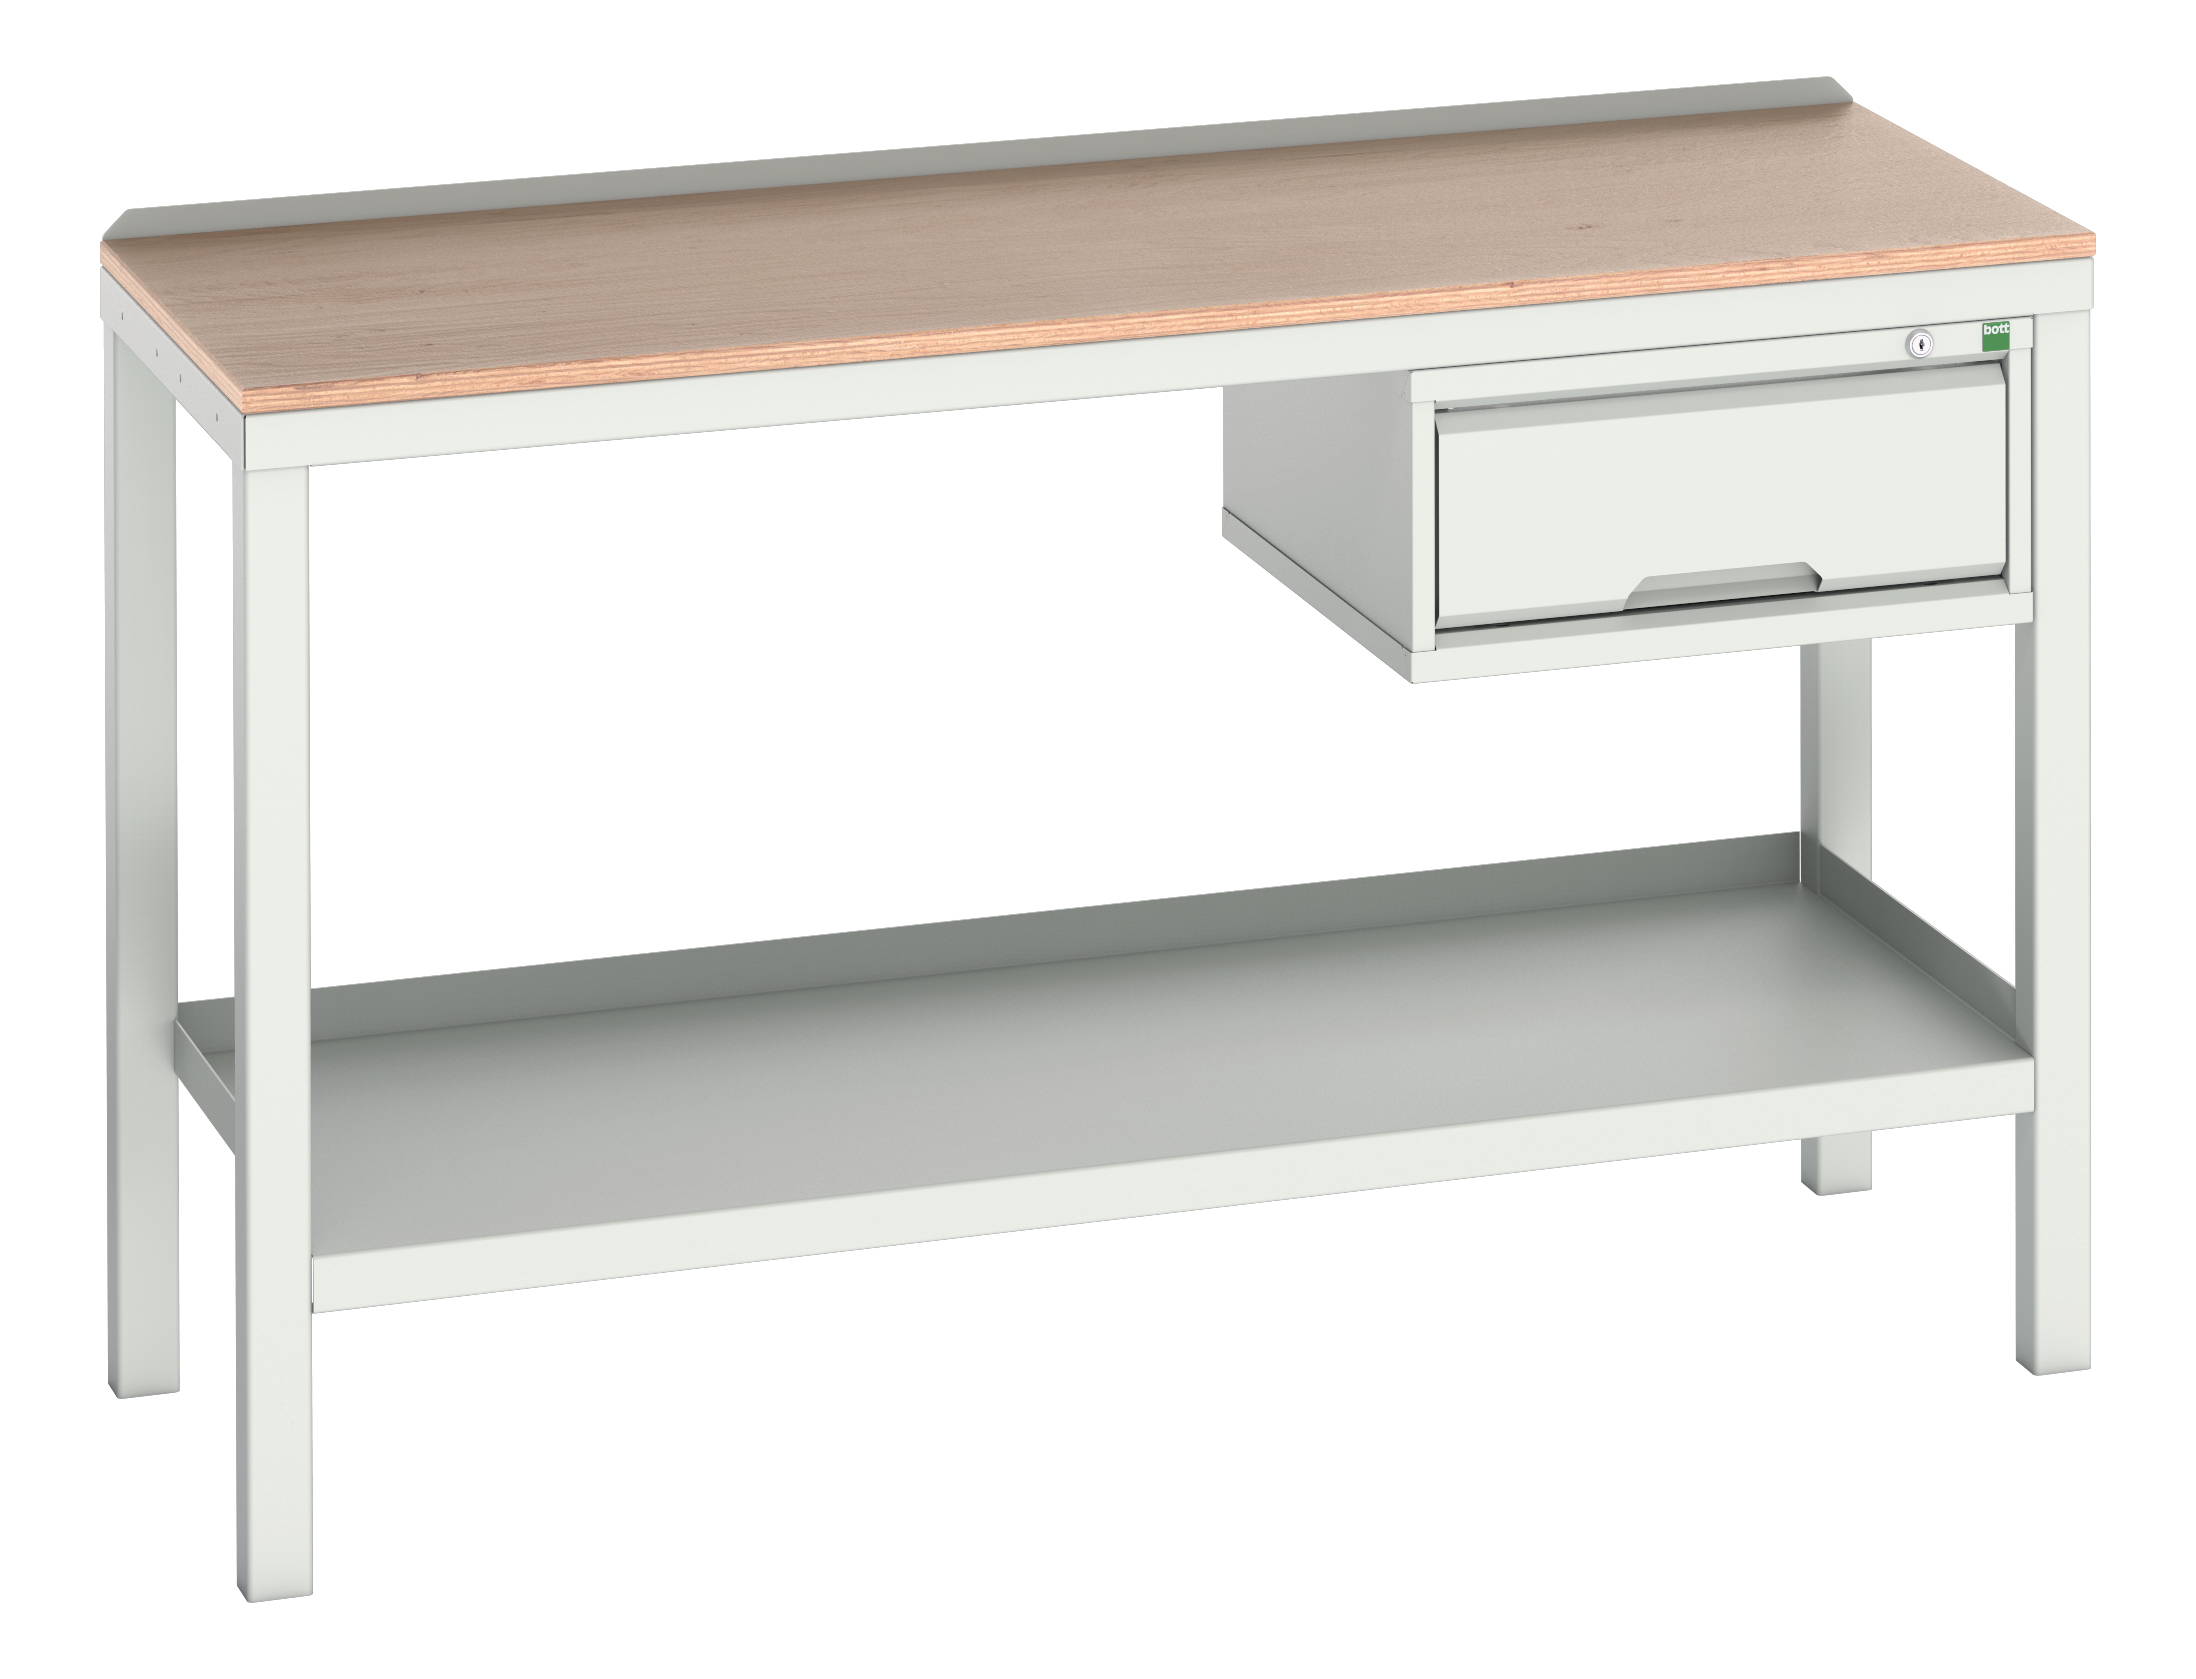 Bott Verso Welded Bench With 1 Drawer Cabinet - 16922605.16